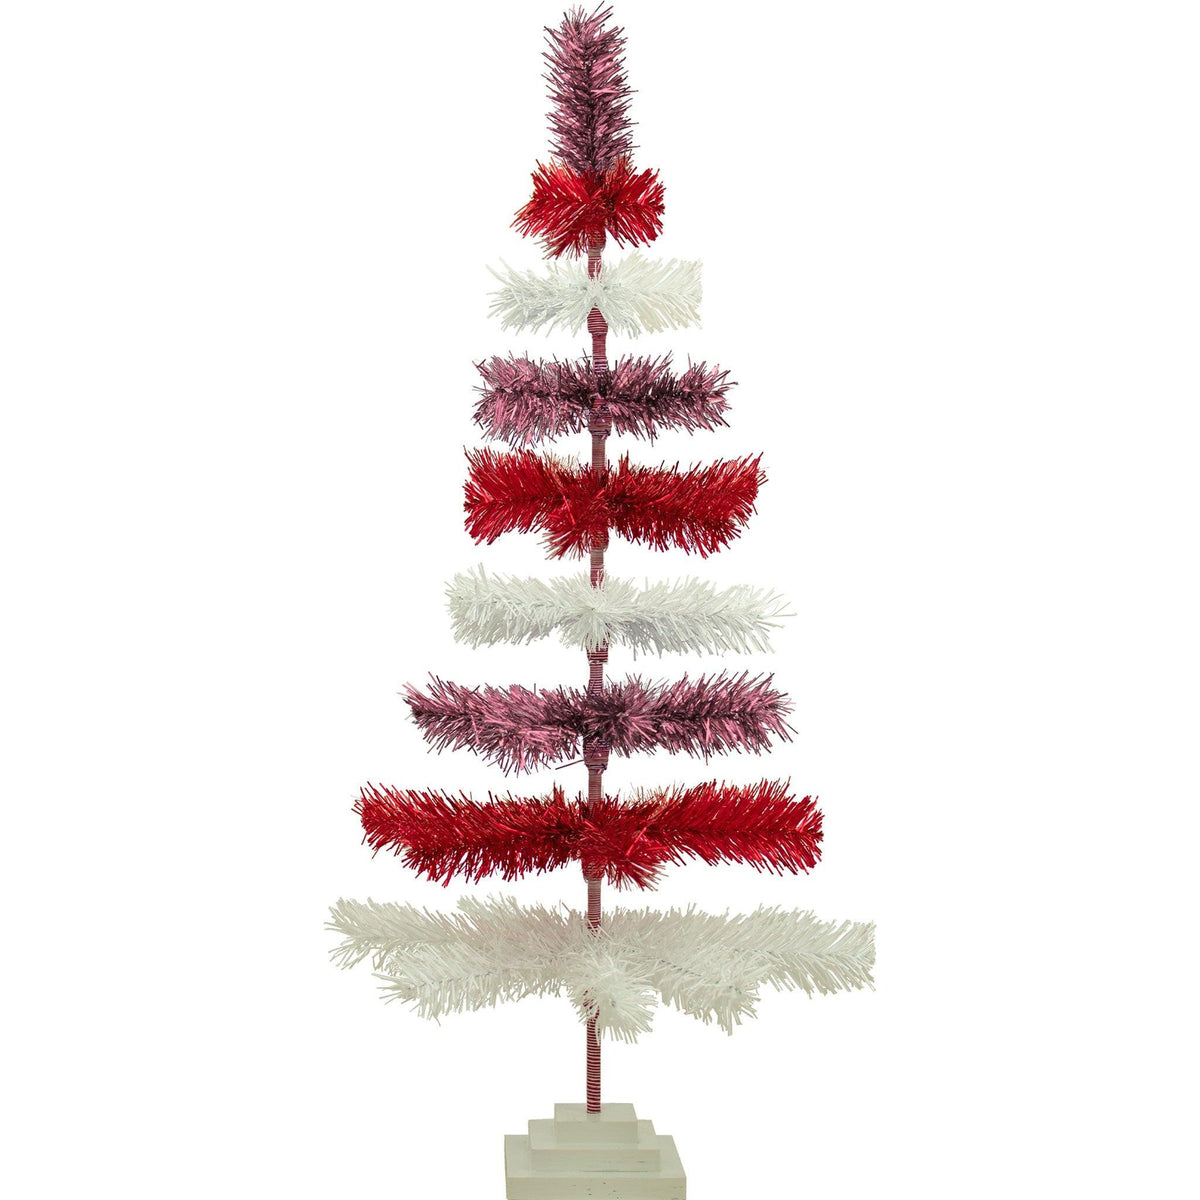 Red, White, and Pink Layered Tinsel Christmas Trees made by hand in the USA     Decorate for the holidays with retro Valentine's Day-themed Trees and start creating your centerpiece.  Shop now at leedisplay.com